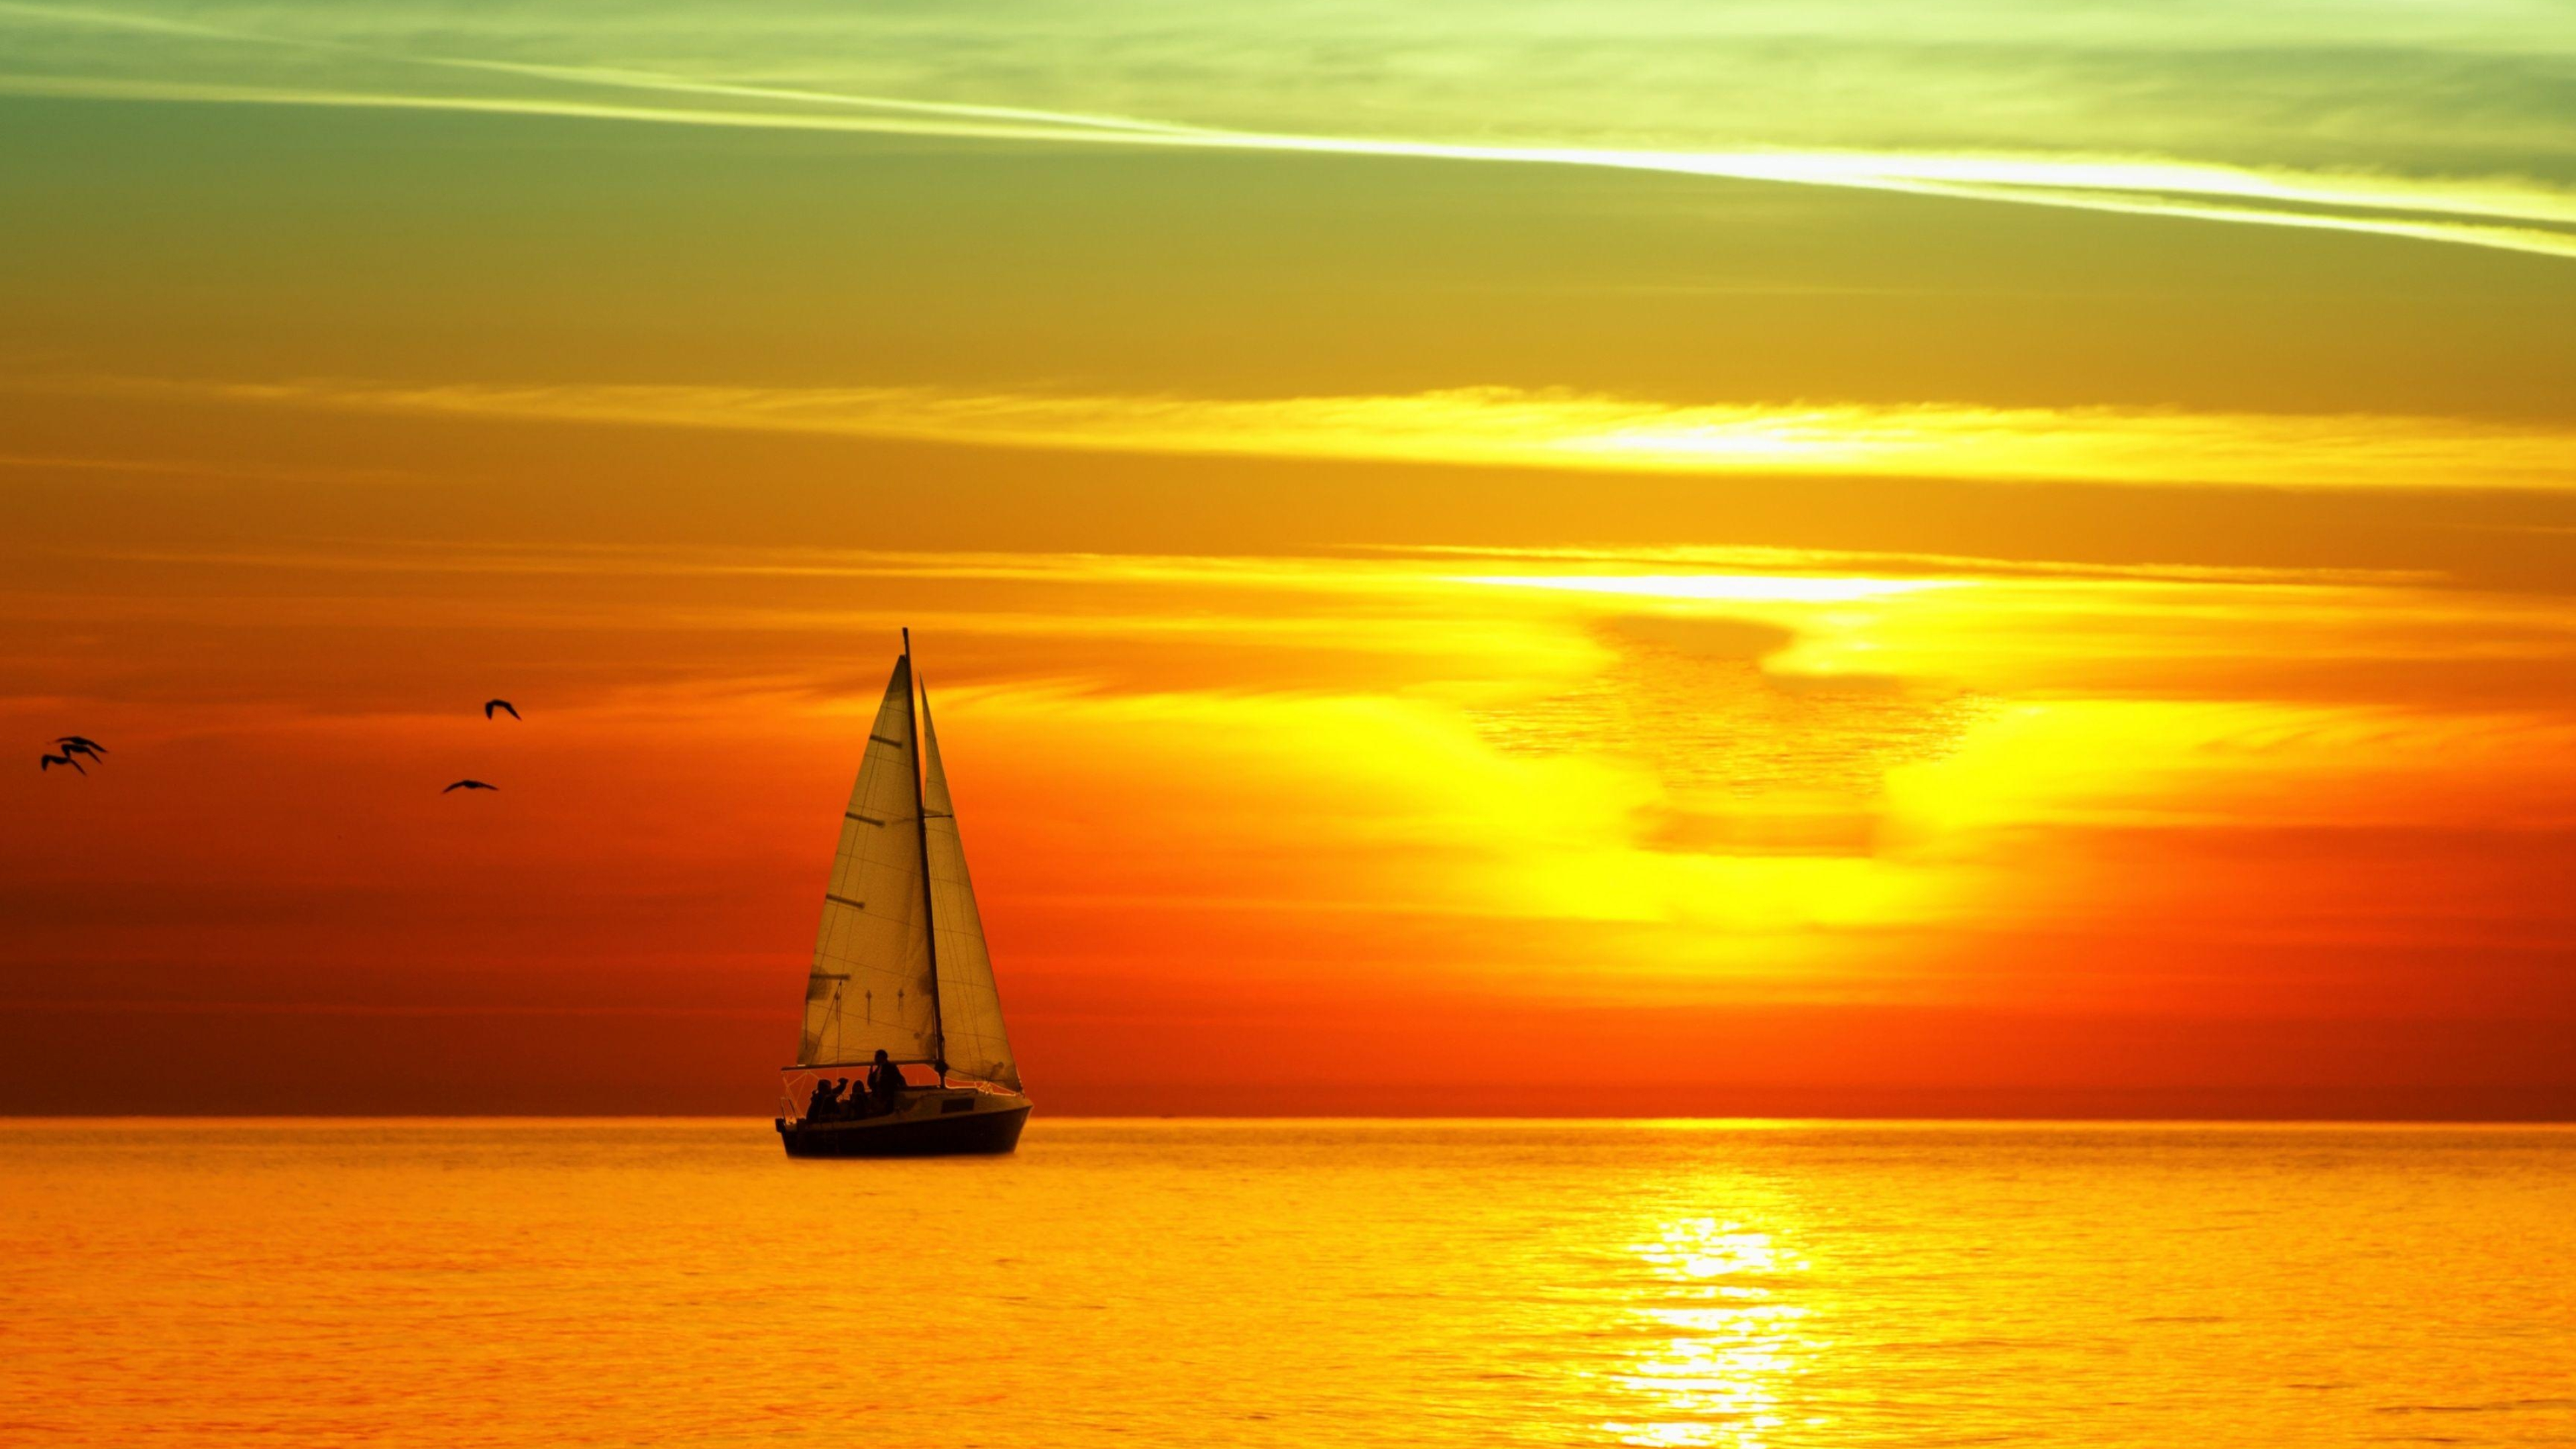 Sail Boat: A boat propelled partly or entirely by sails. 3840x2160 4K Wallpaper.